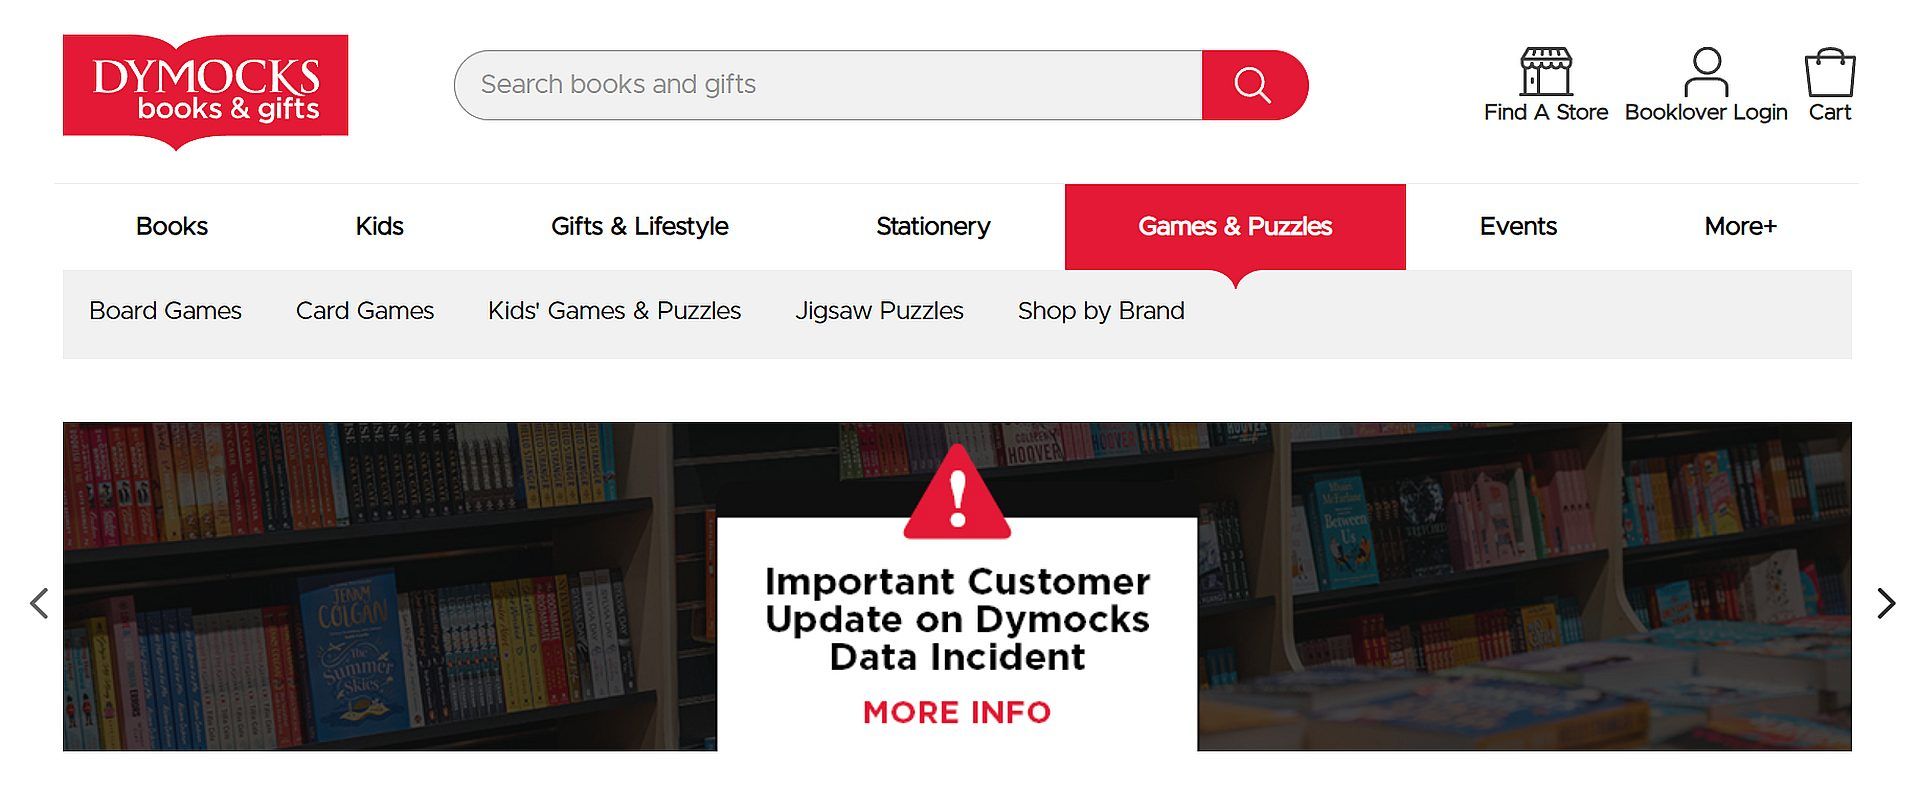 Dymocks data breach: Over 1.24M customer records exposed, but no sensitive info compromised. Stay vigilant online